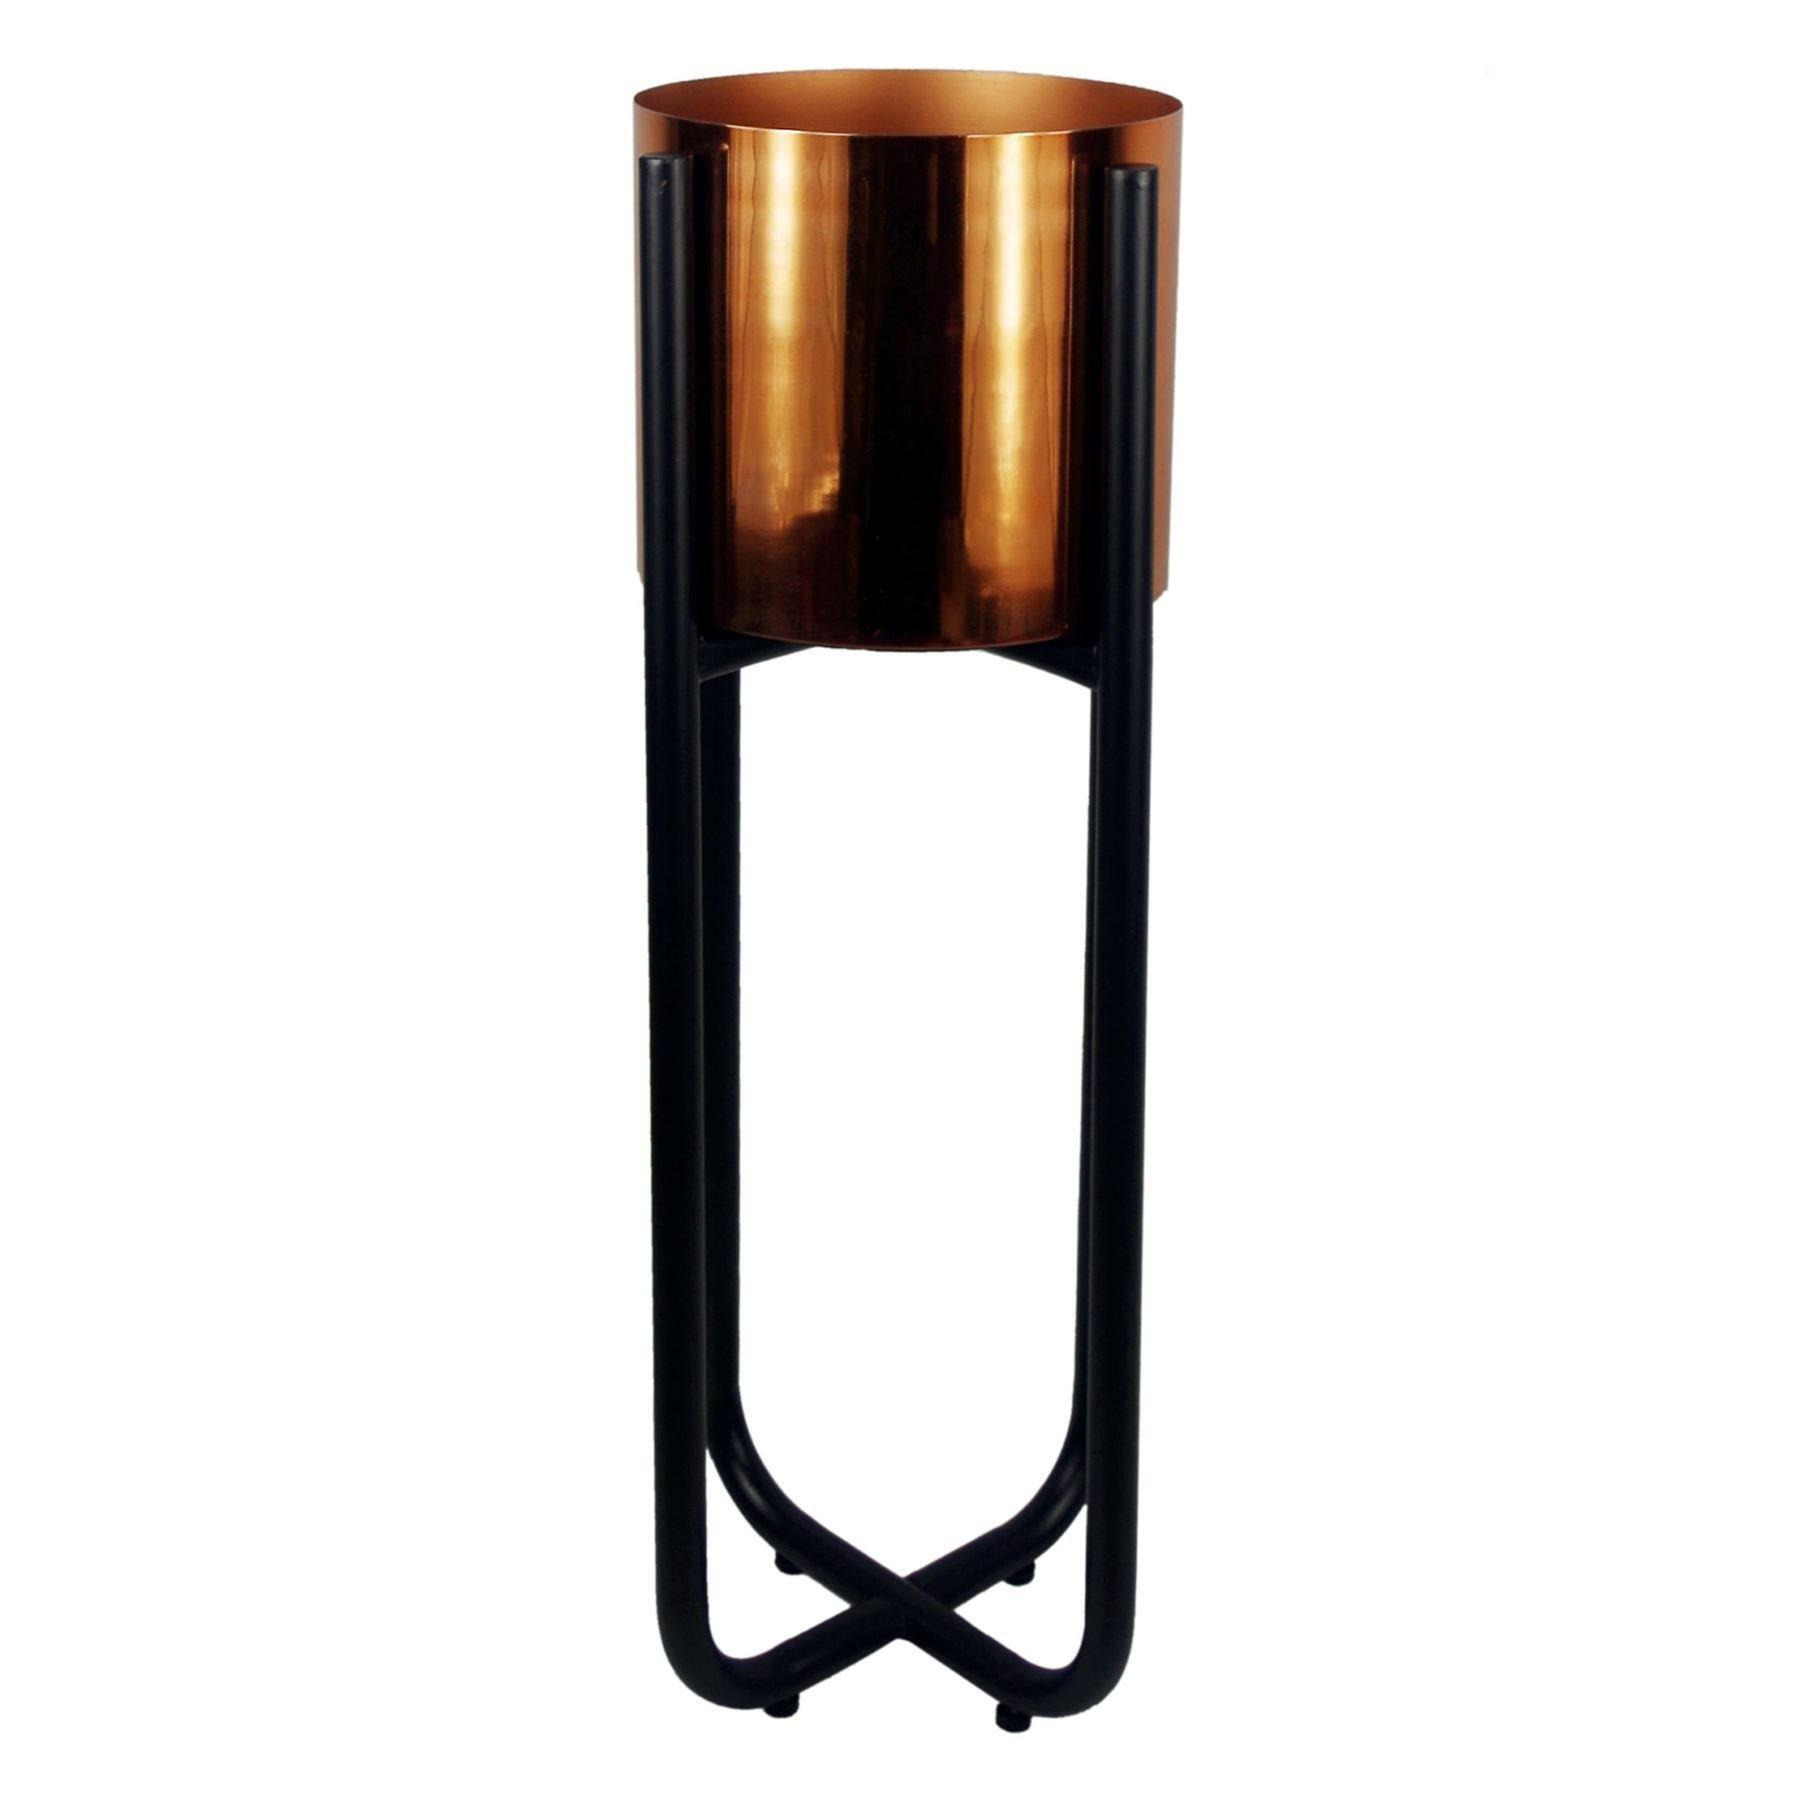 Tall Black Stand with Copper Metal Planter 62cm x 18cm - image 1